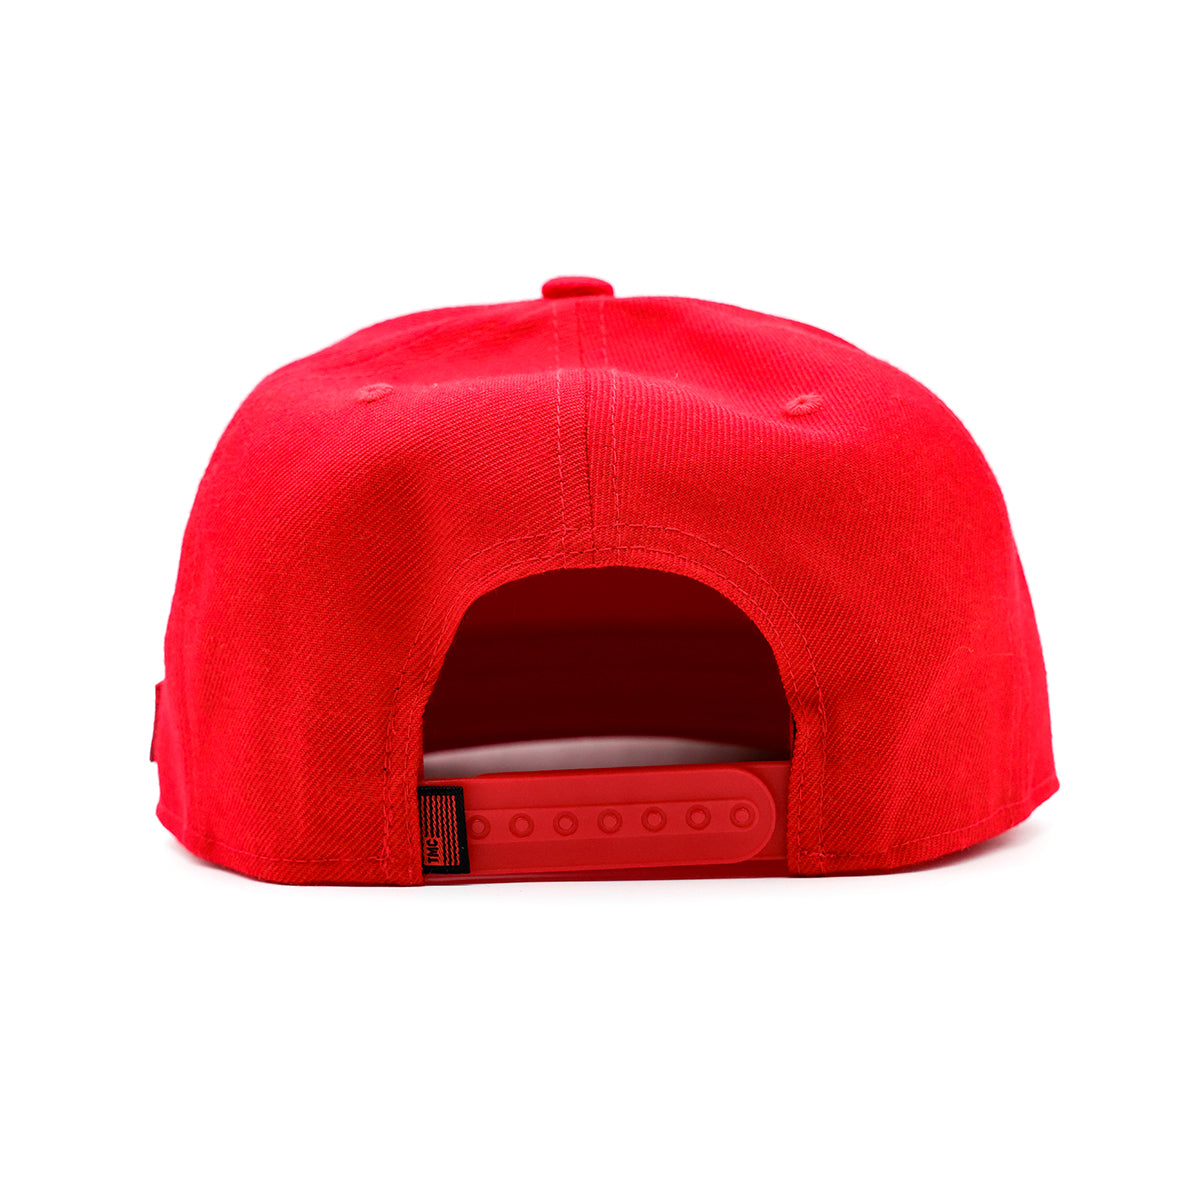 Victory Lap Limited Edition Snapback - Red/White - Back